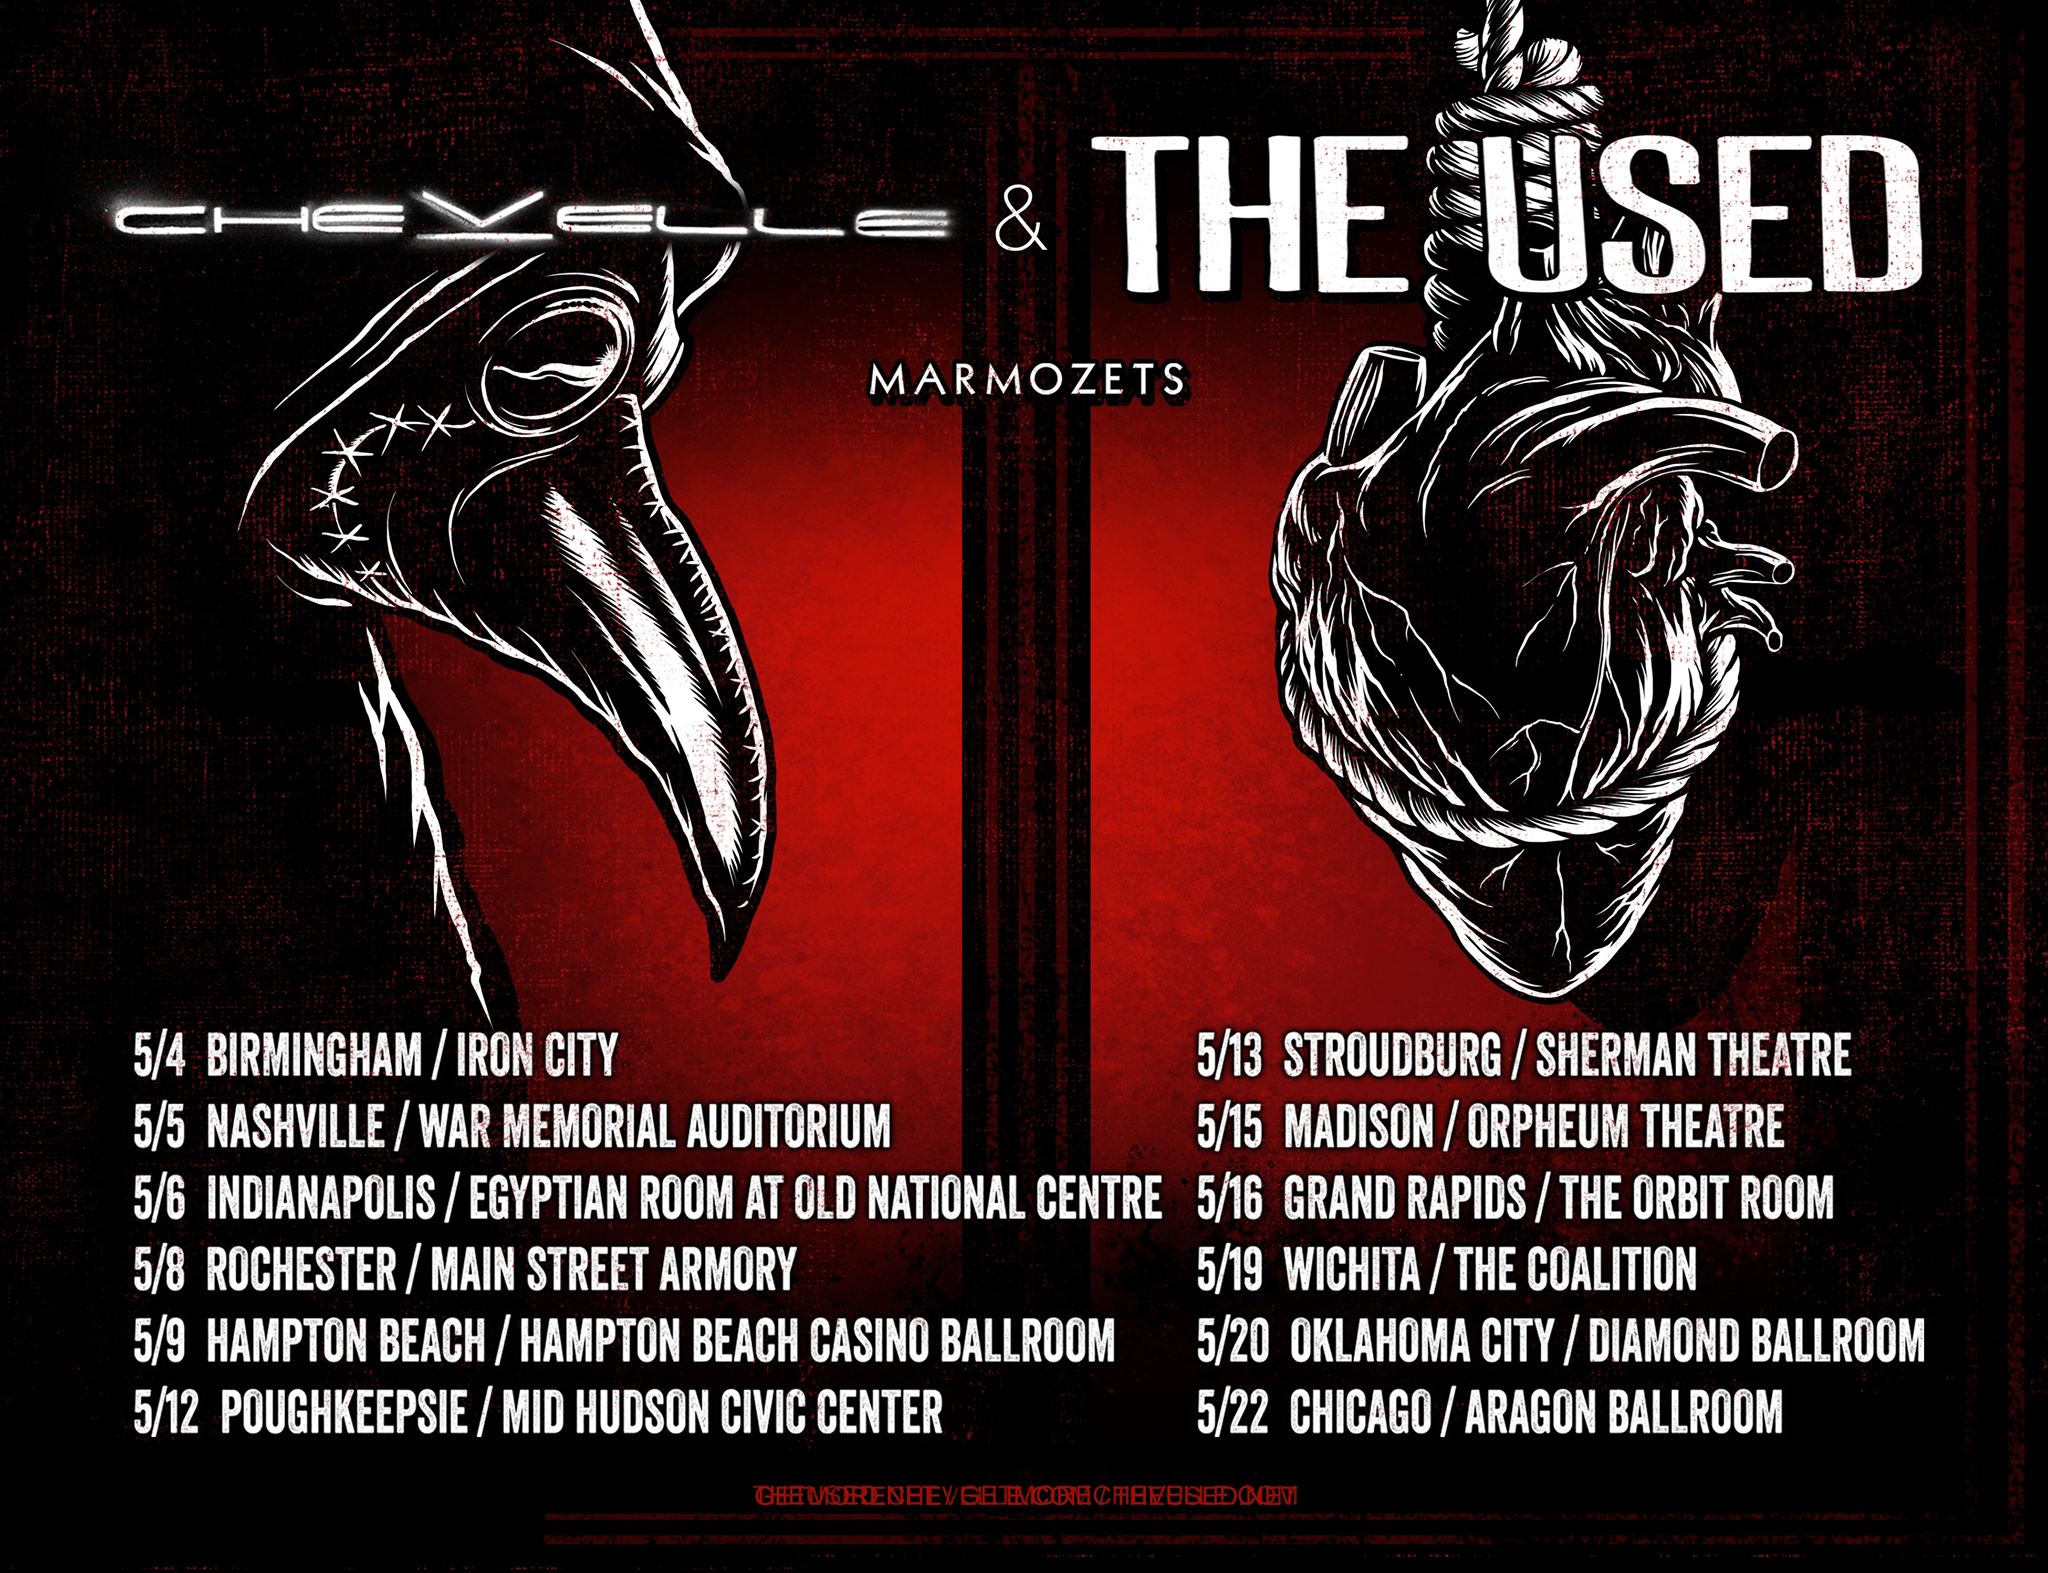 CHEVELLE AND THE USED ANNOUNCE 2015 U.S. TOUR WITH SPECIAL GUESTS MARMOZETS